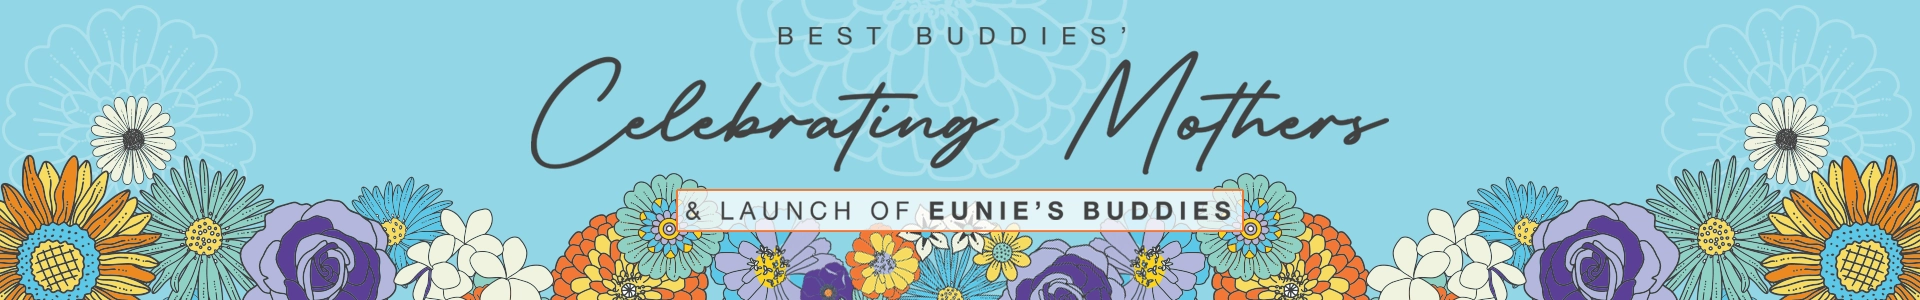 Celebrating Mothers and Launch of Eunie's Buddies